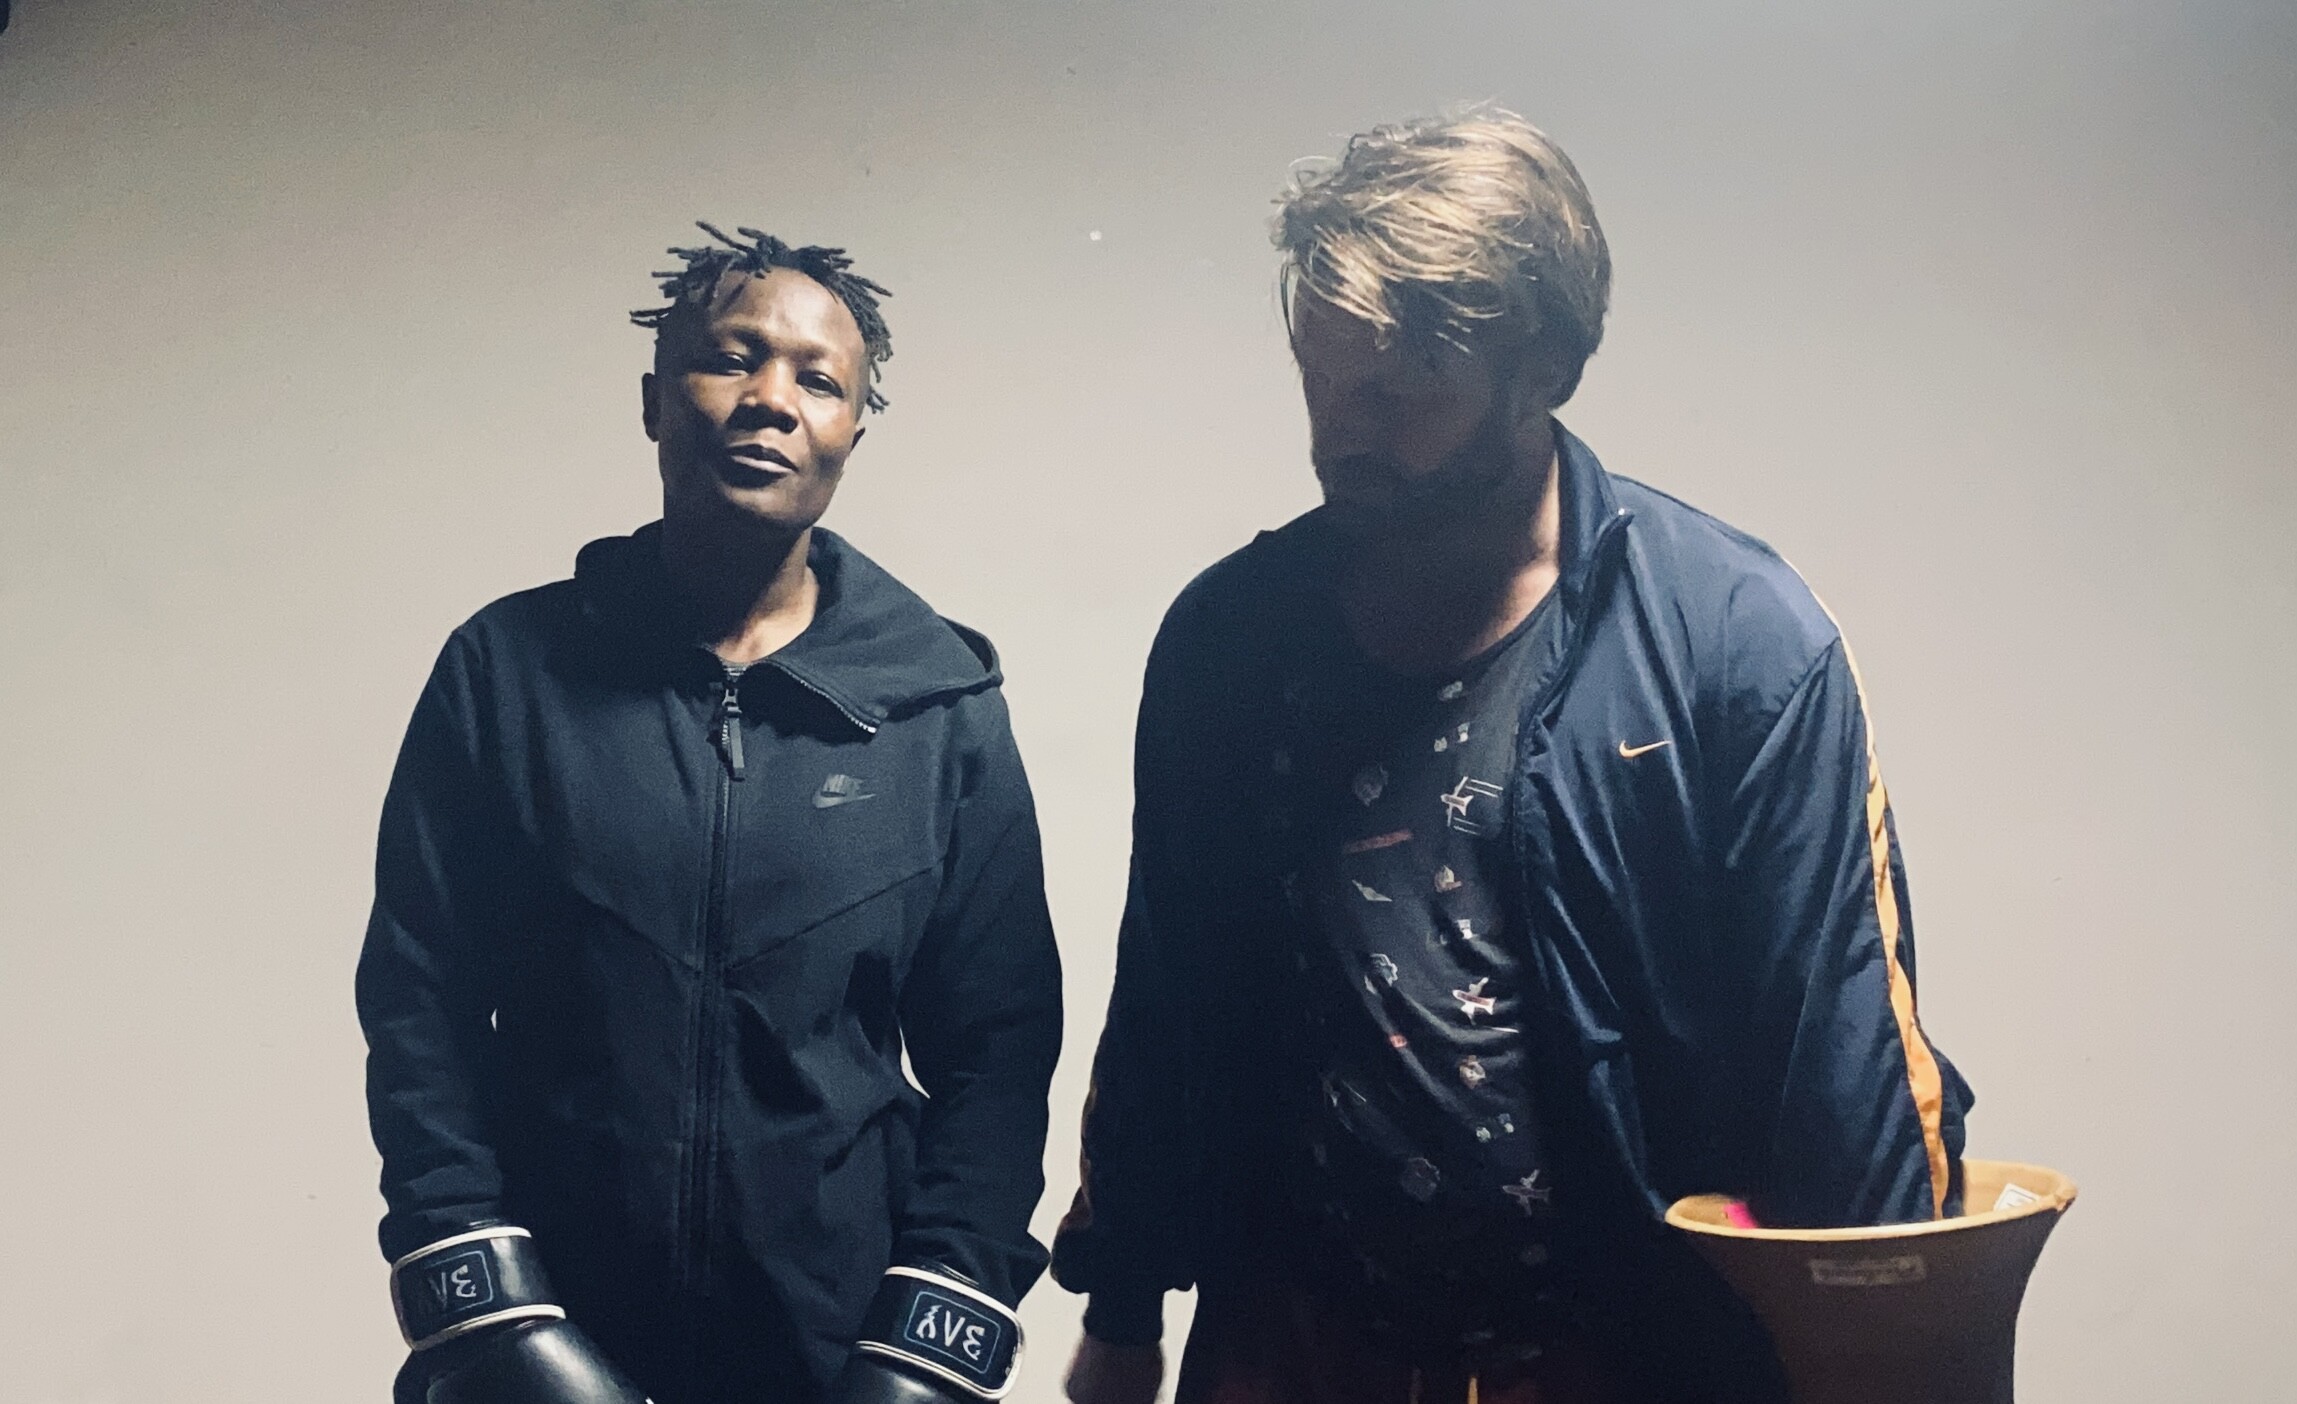 Photo of two people in black sports suits. On the left is a dark-skinned person with black curly hair looking at the camera and on the right is a white person looking at the ground.